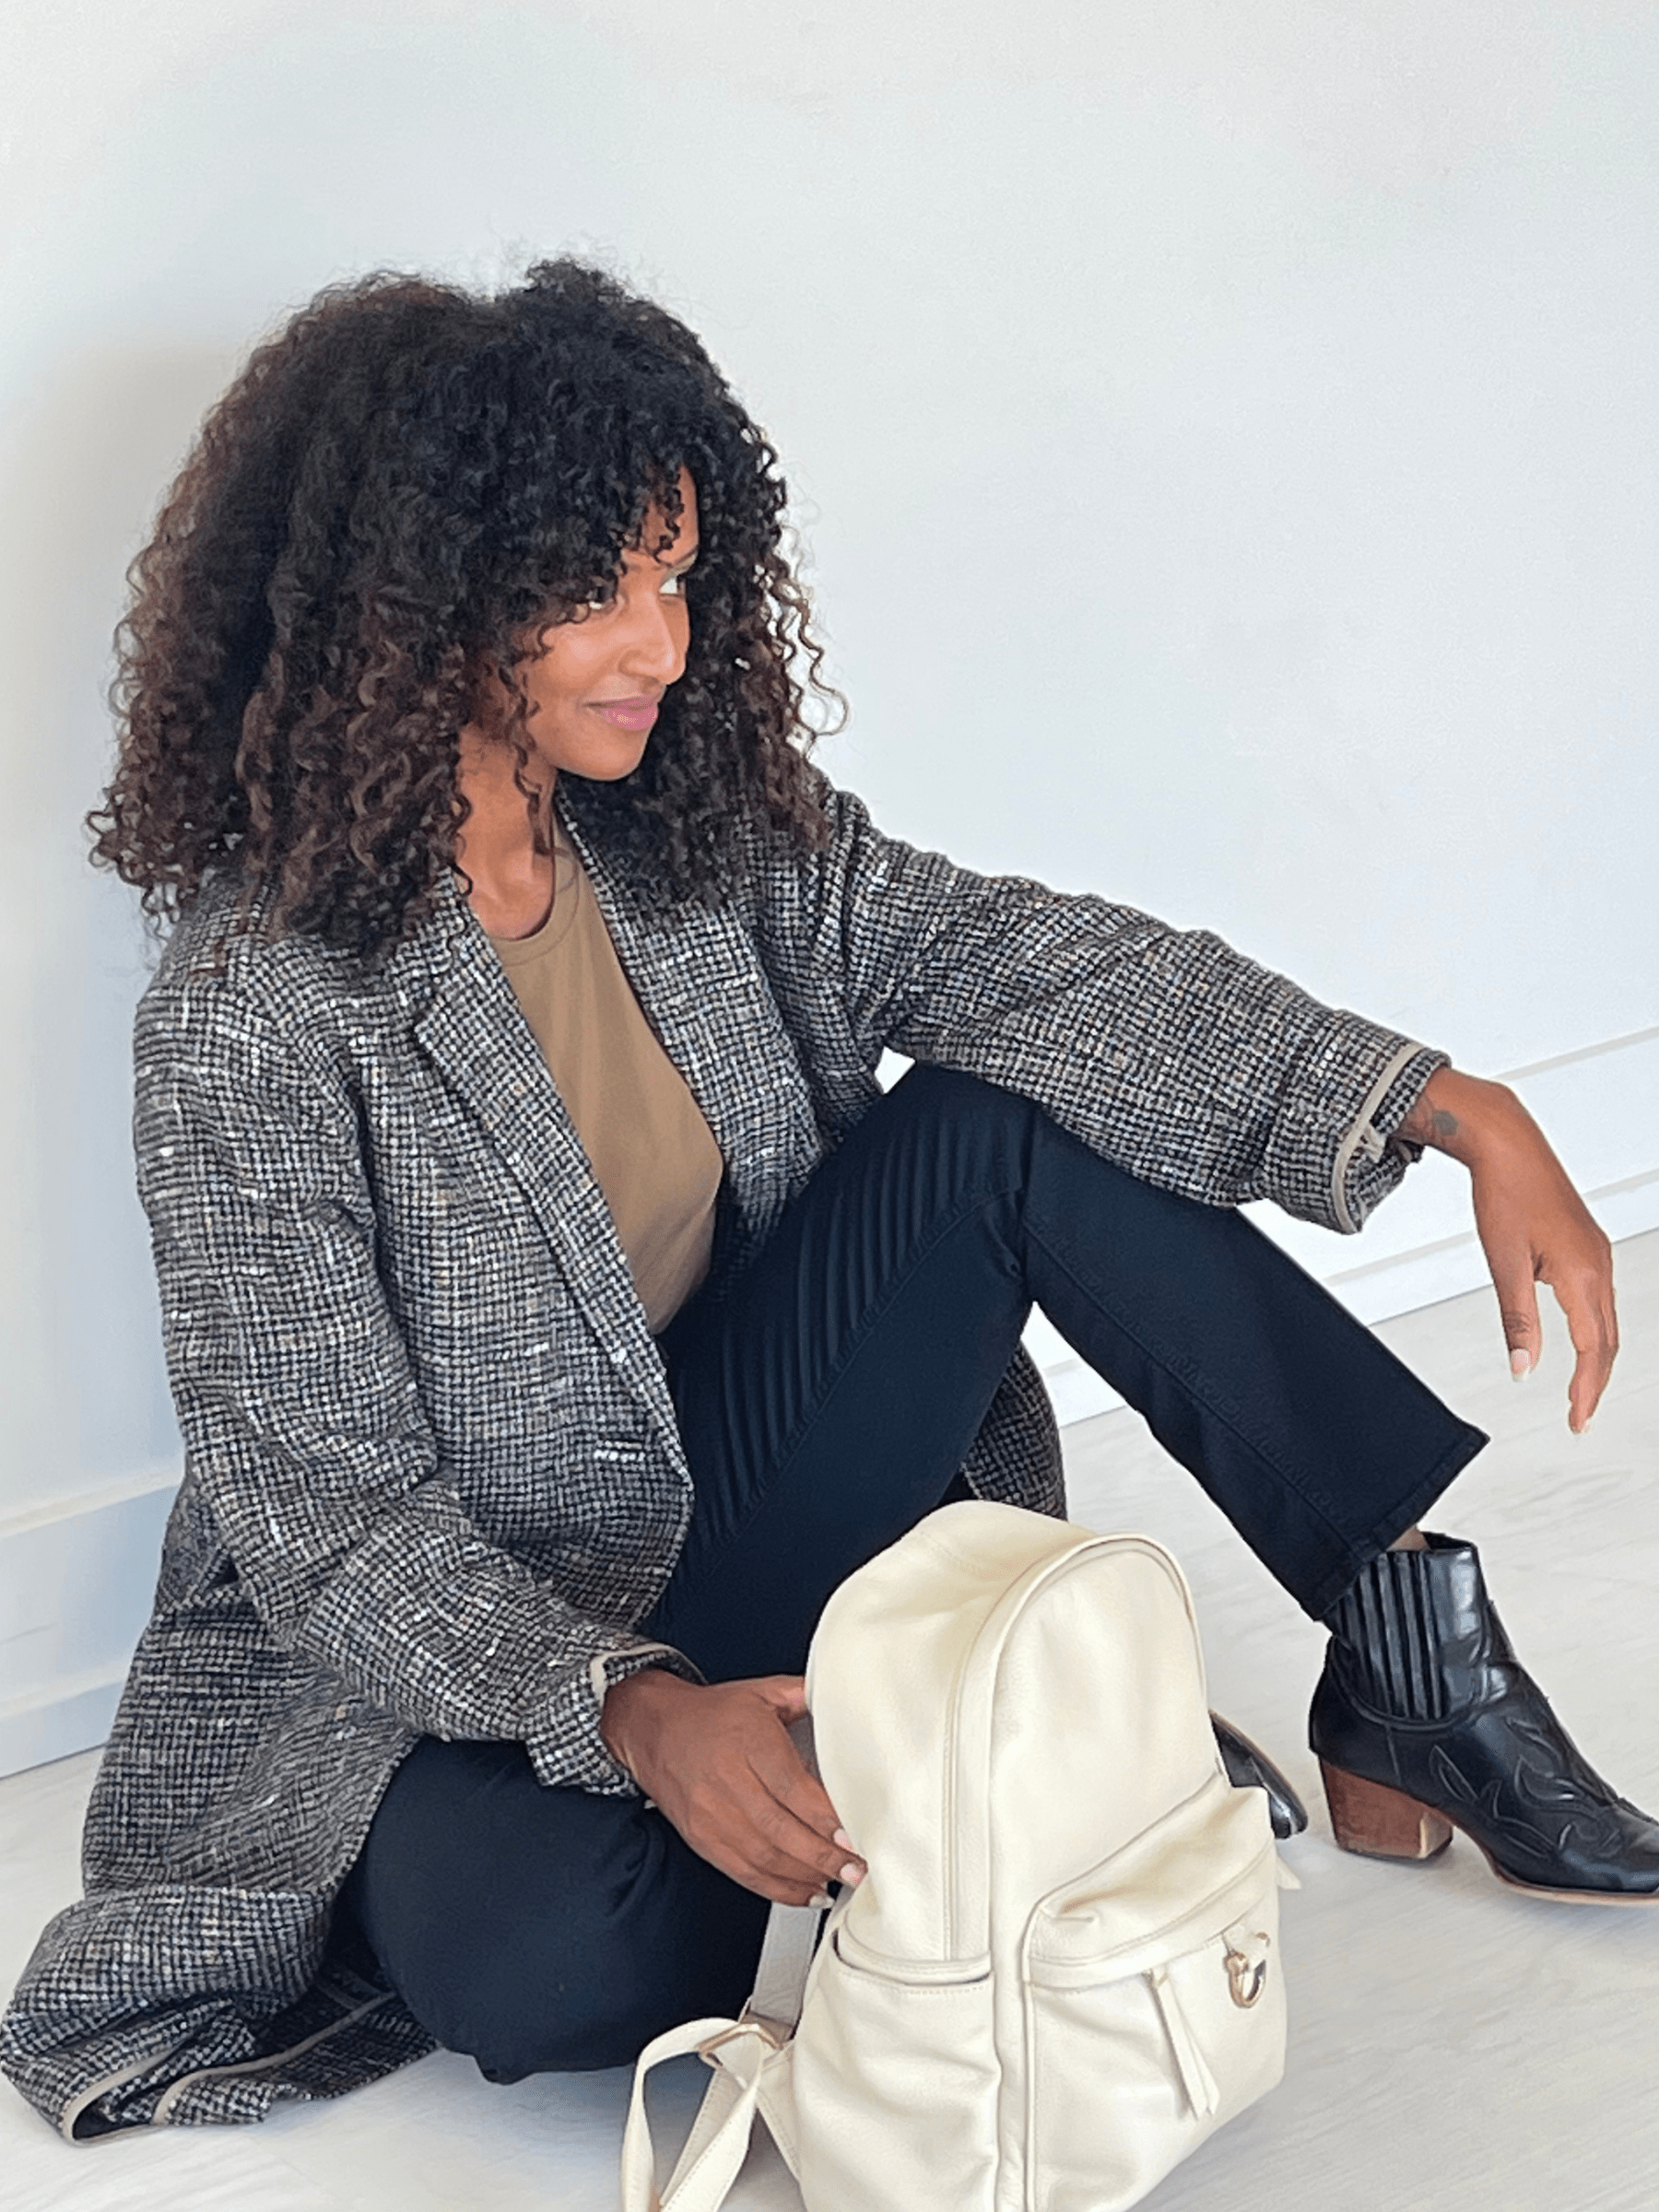 Go behind the scenes of sapahn's Fall 2021 Collection photoshoot